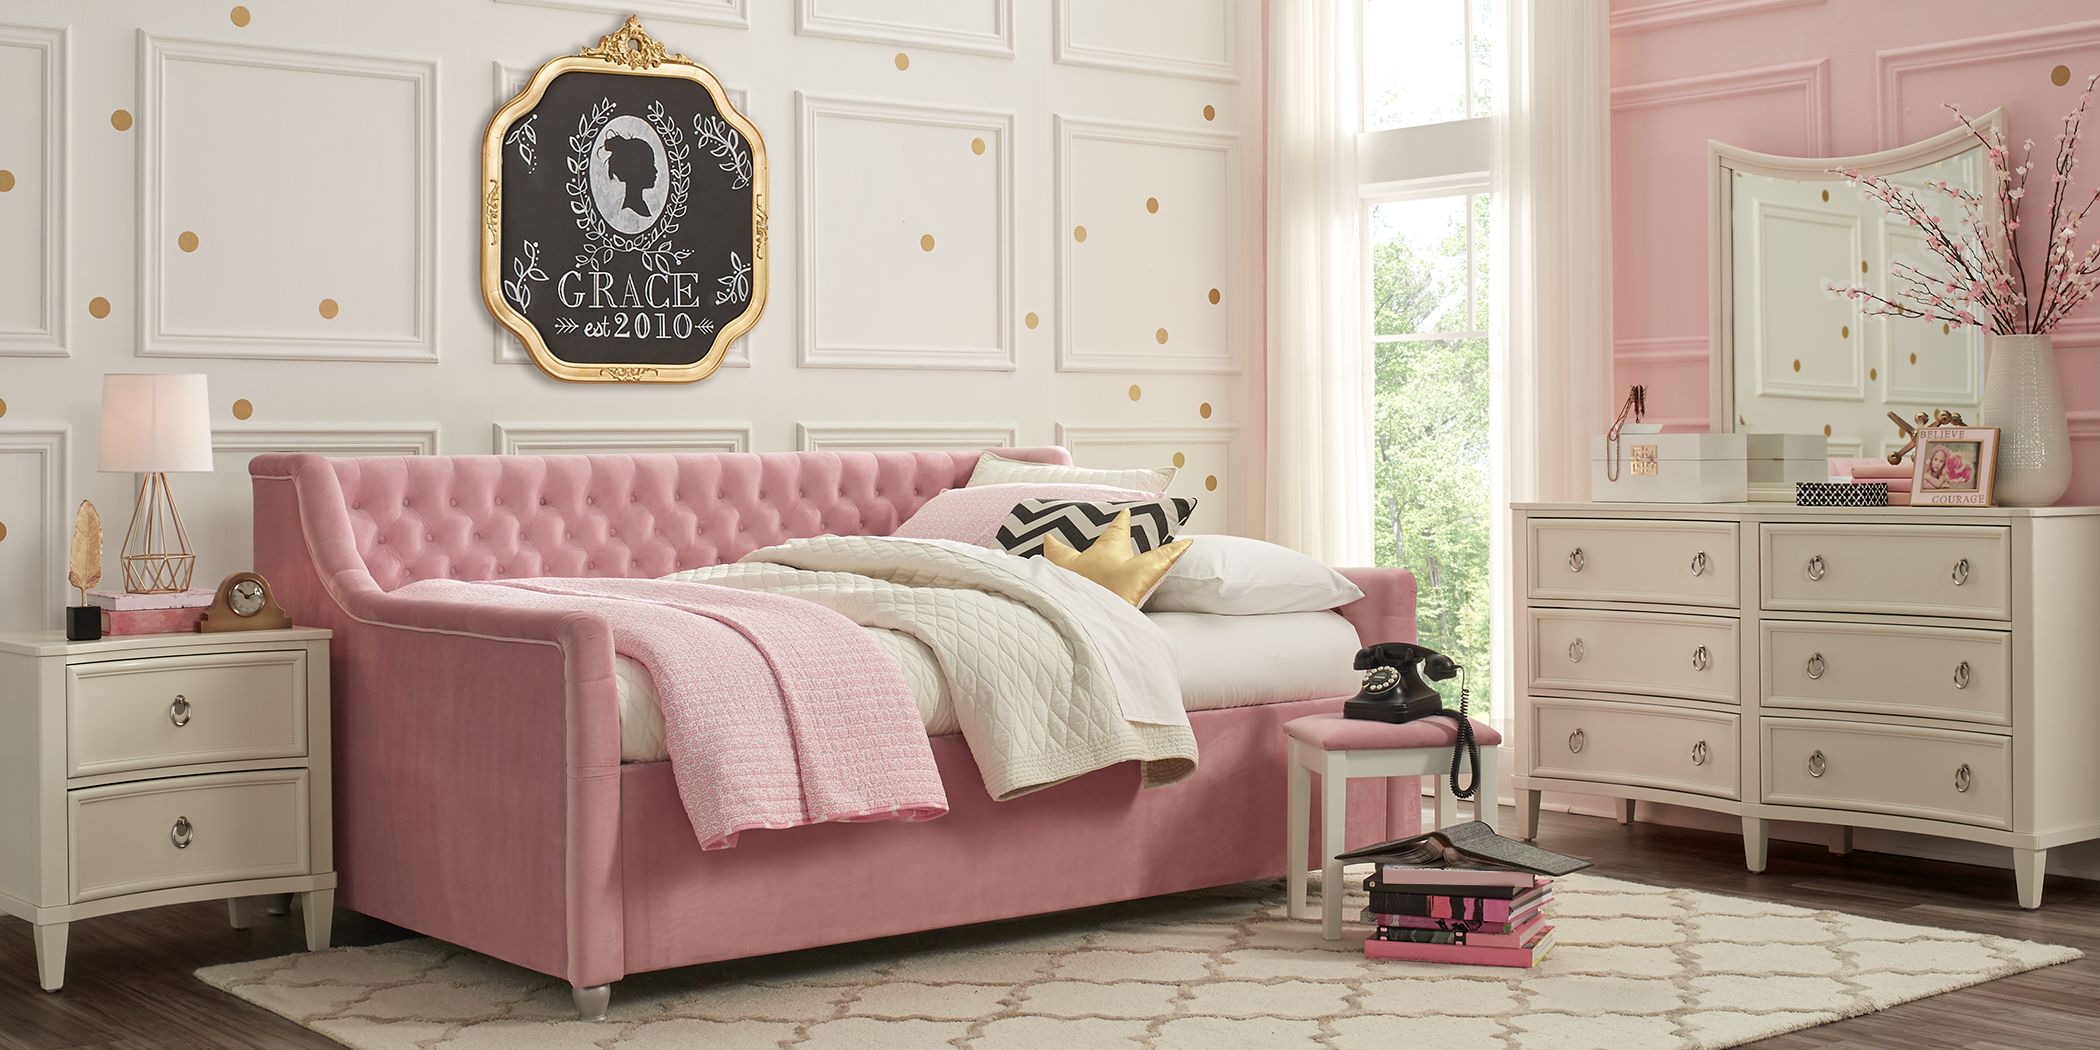 girls room daybed